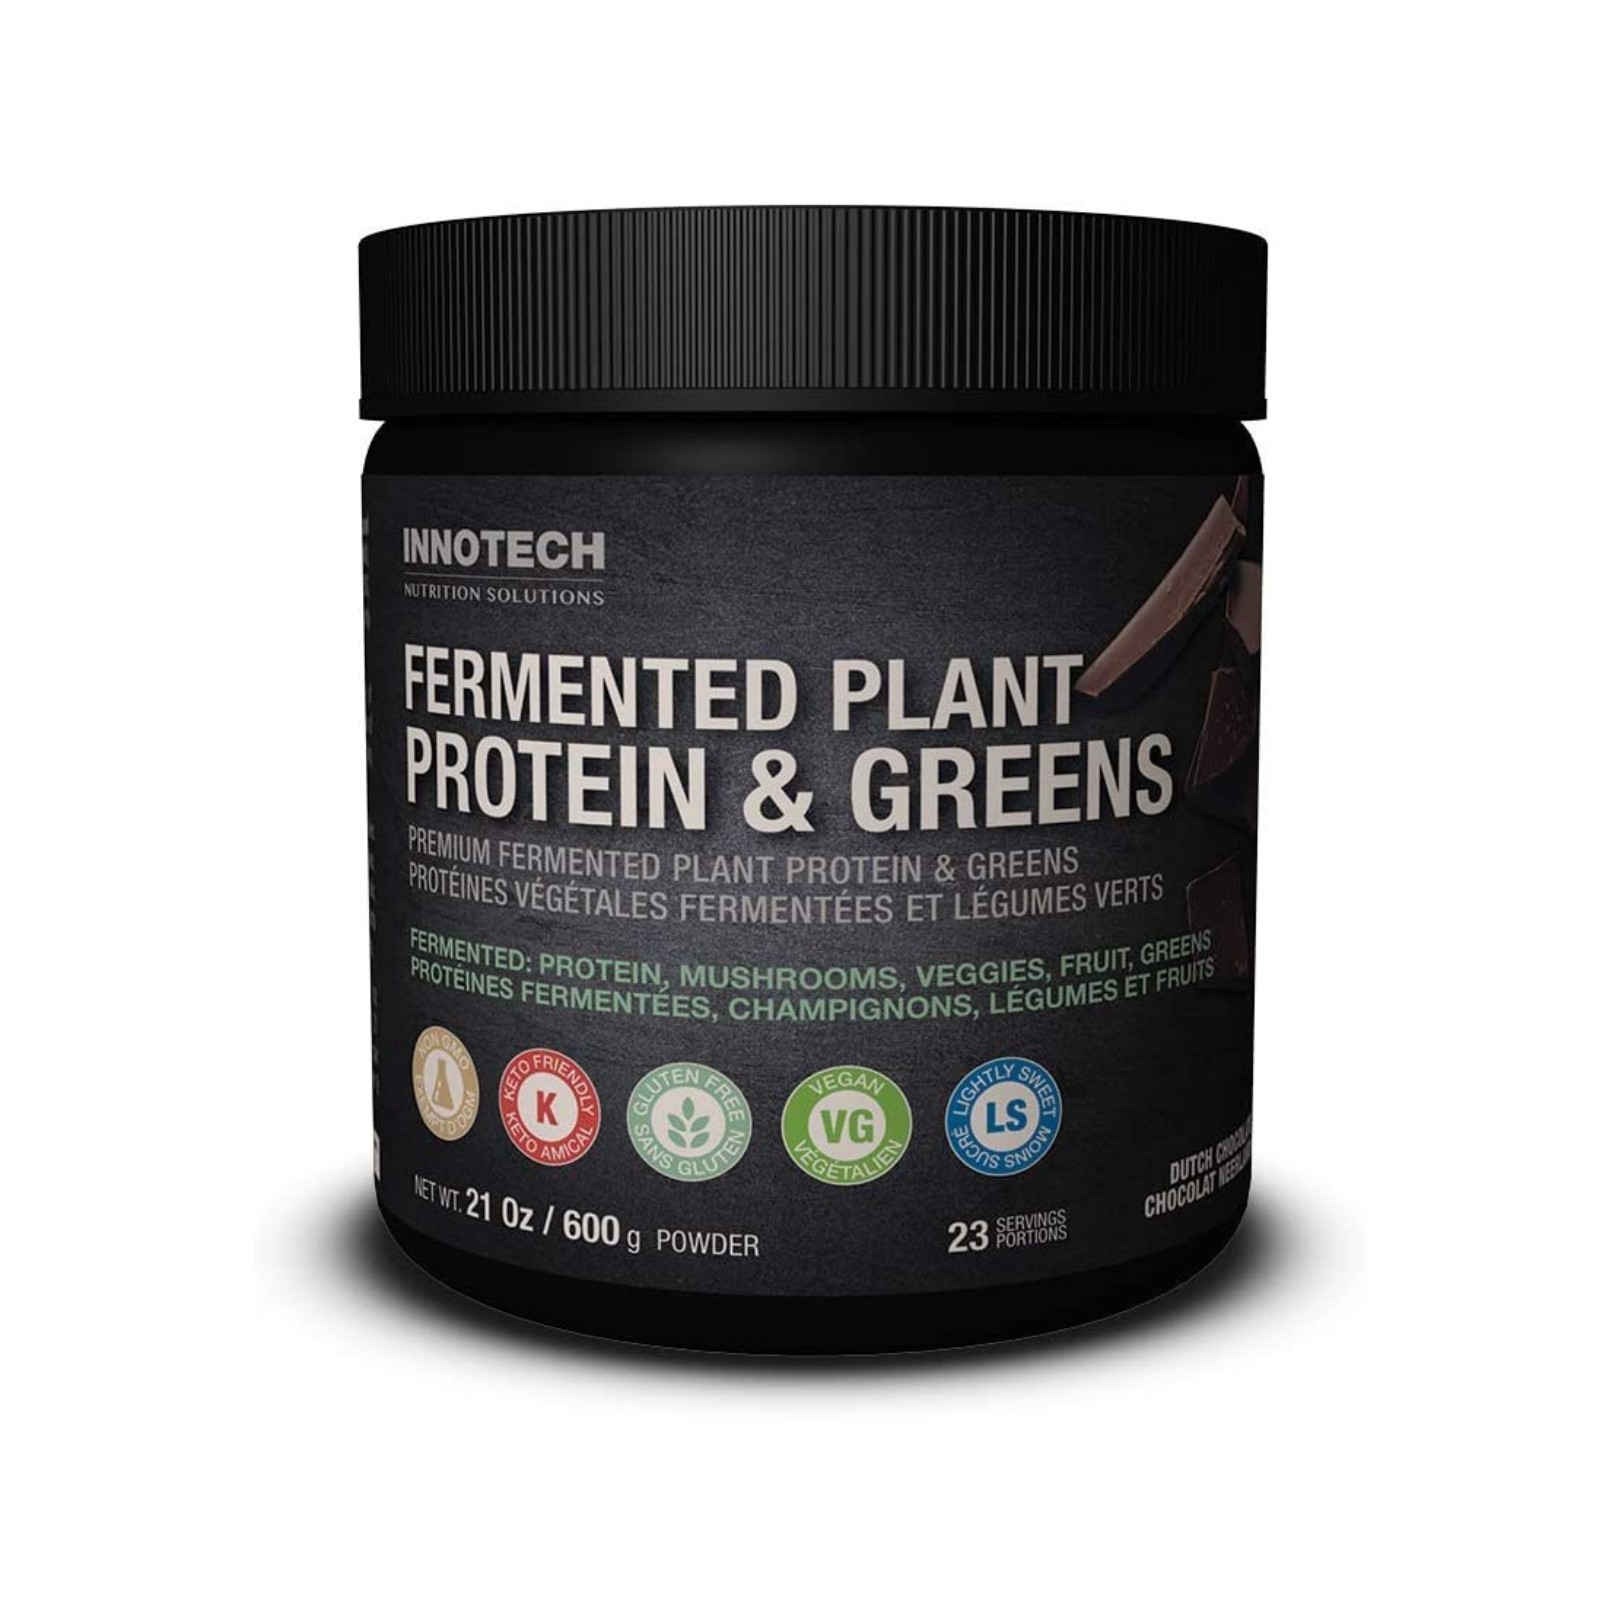 Fermented Plant Protein & Greens Innotech Nutrient Solutions Chocolate 1